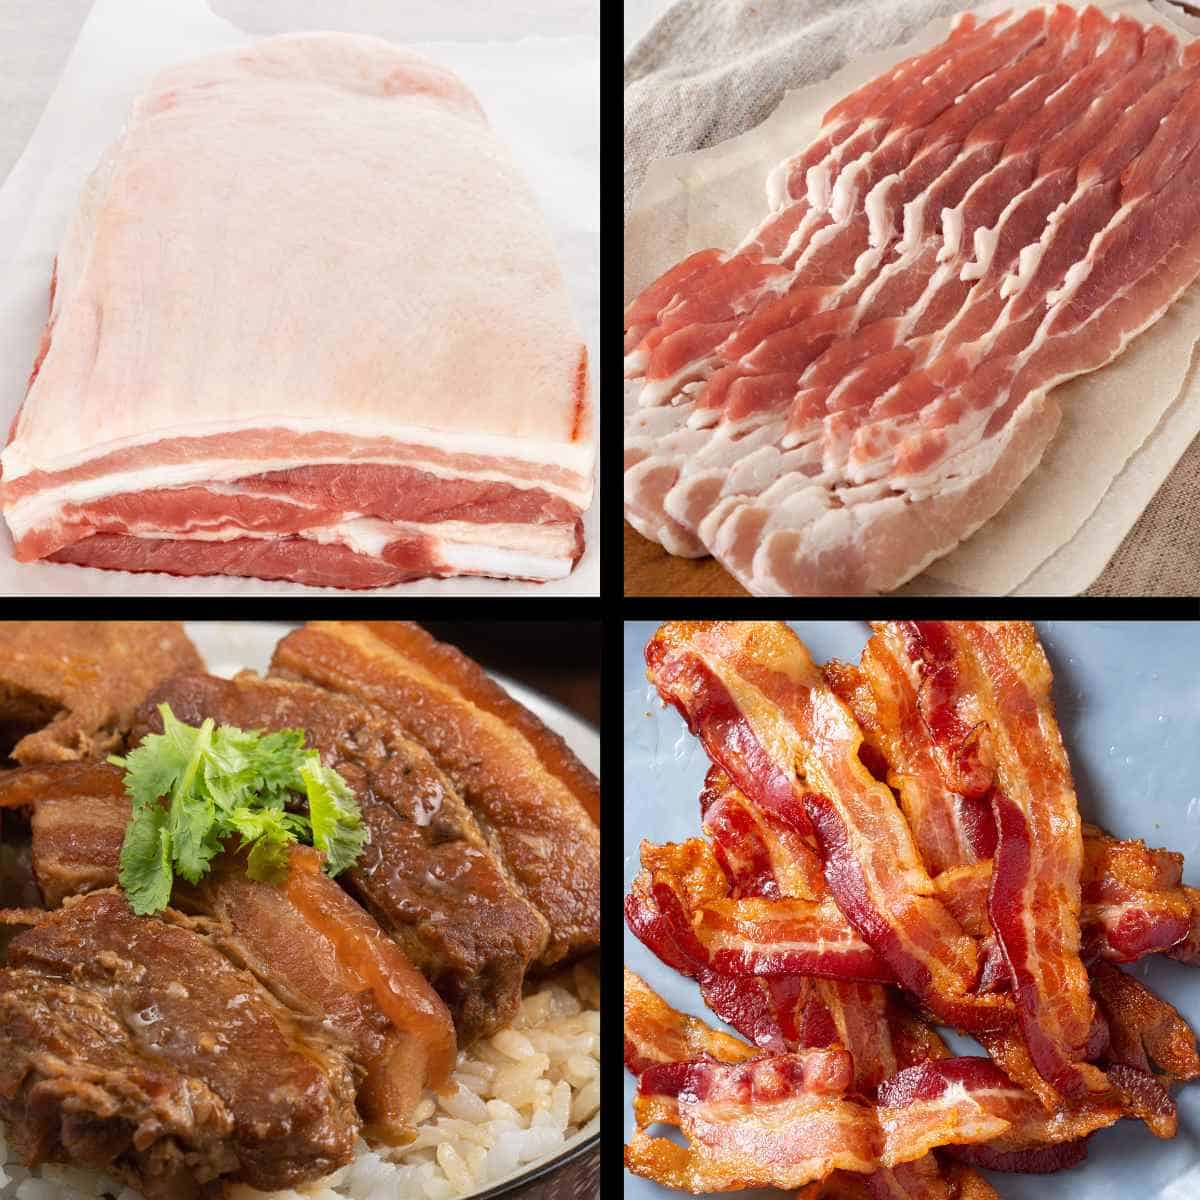 raw pork belly, raw bacon, cooked pork belly, and cooked bacon.